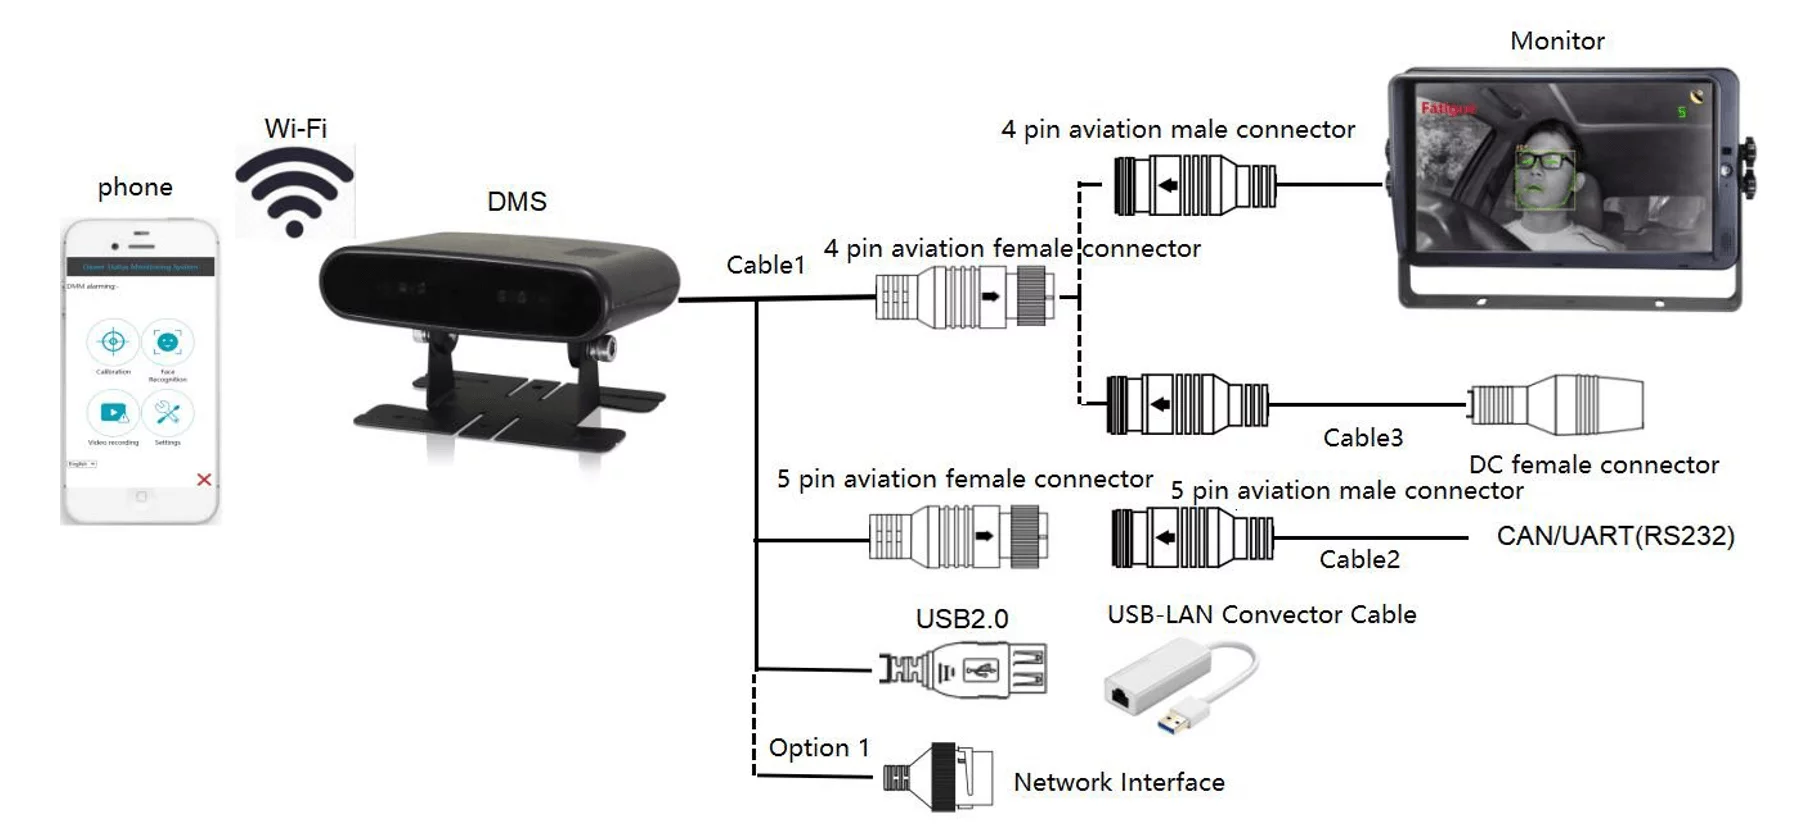 System Connection and Cable Definition